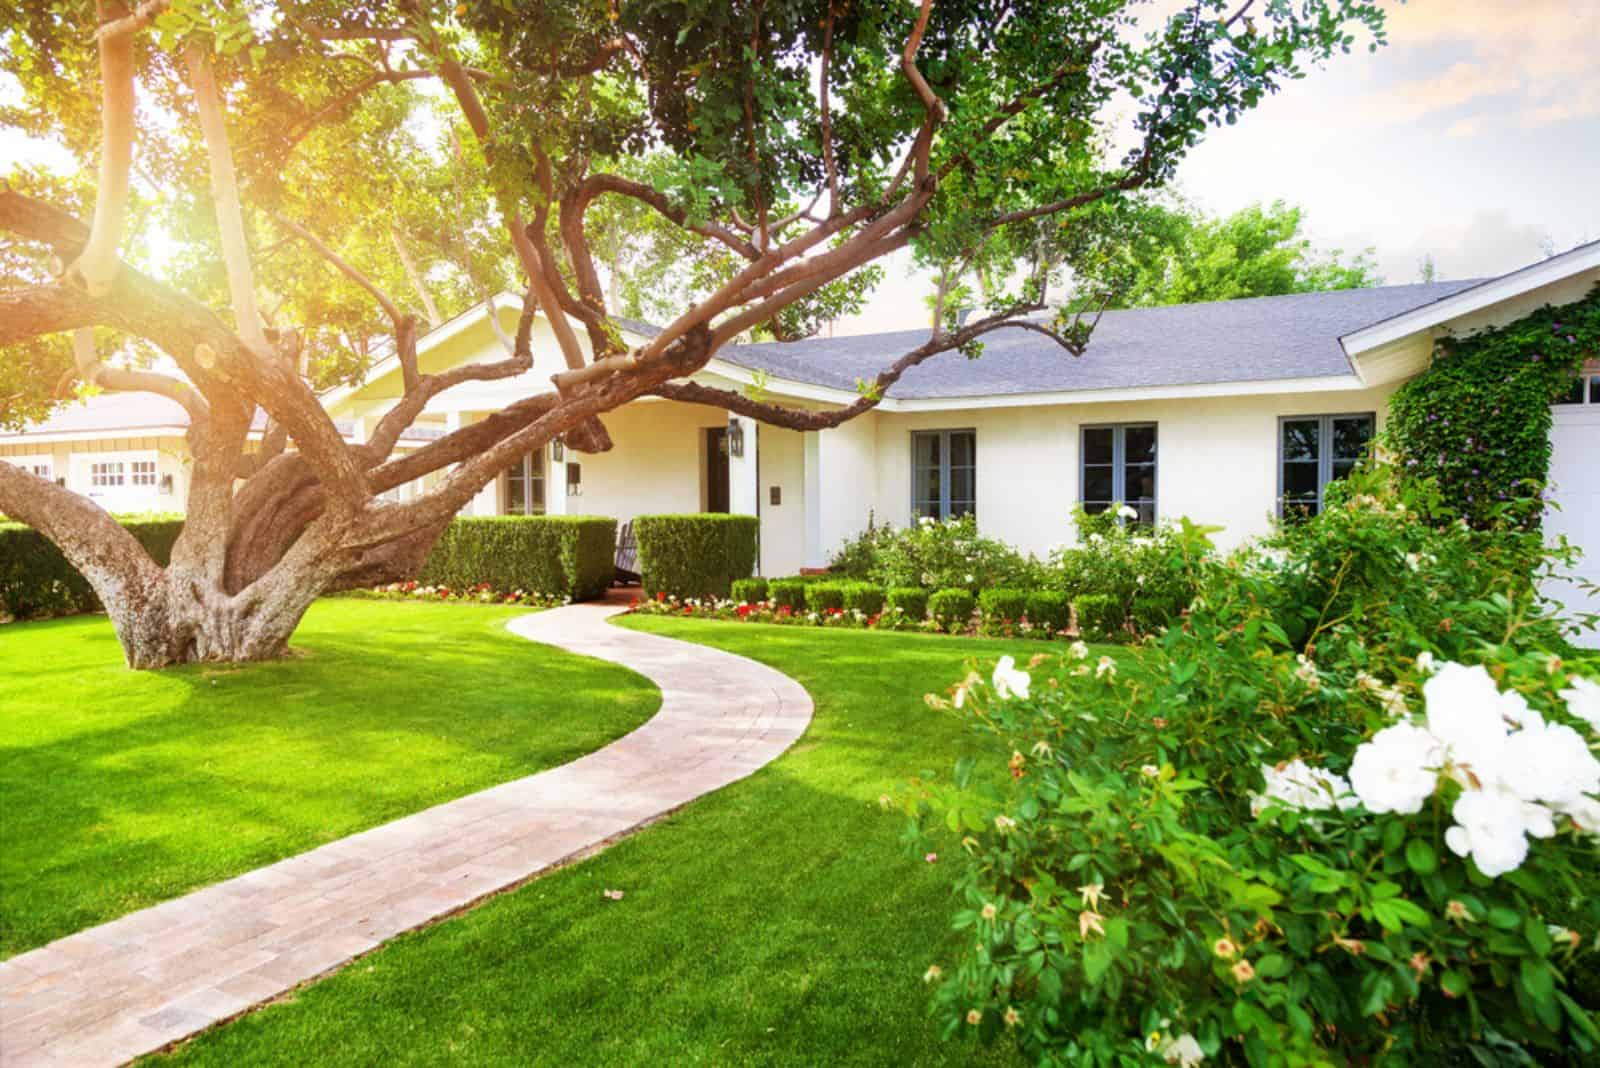 beautiful home with yard and big tree in sunlight